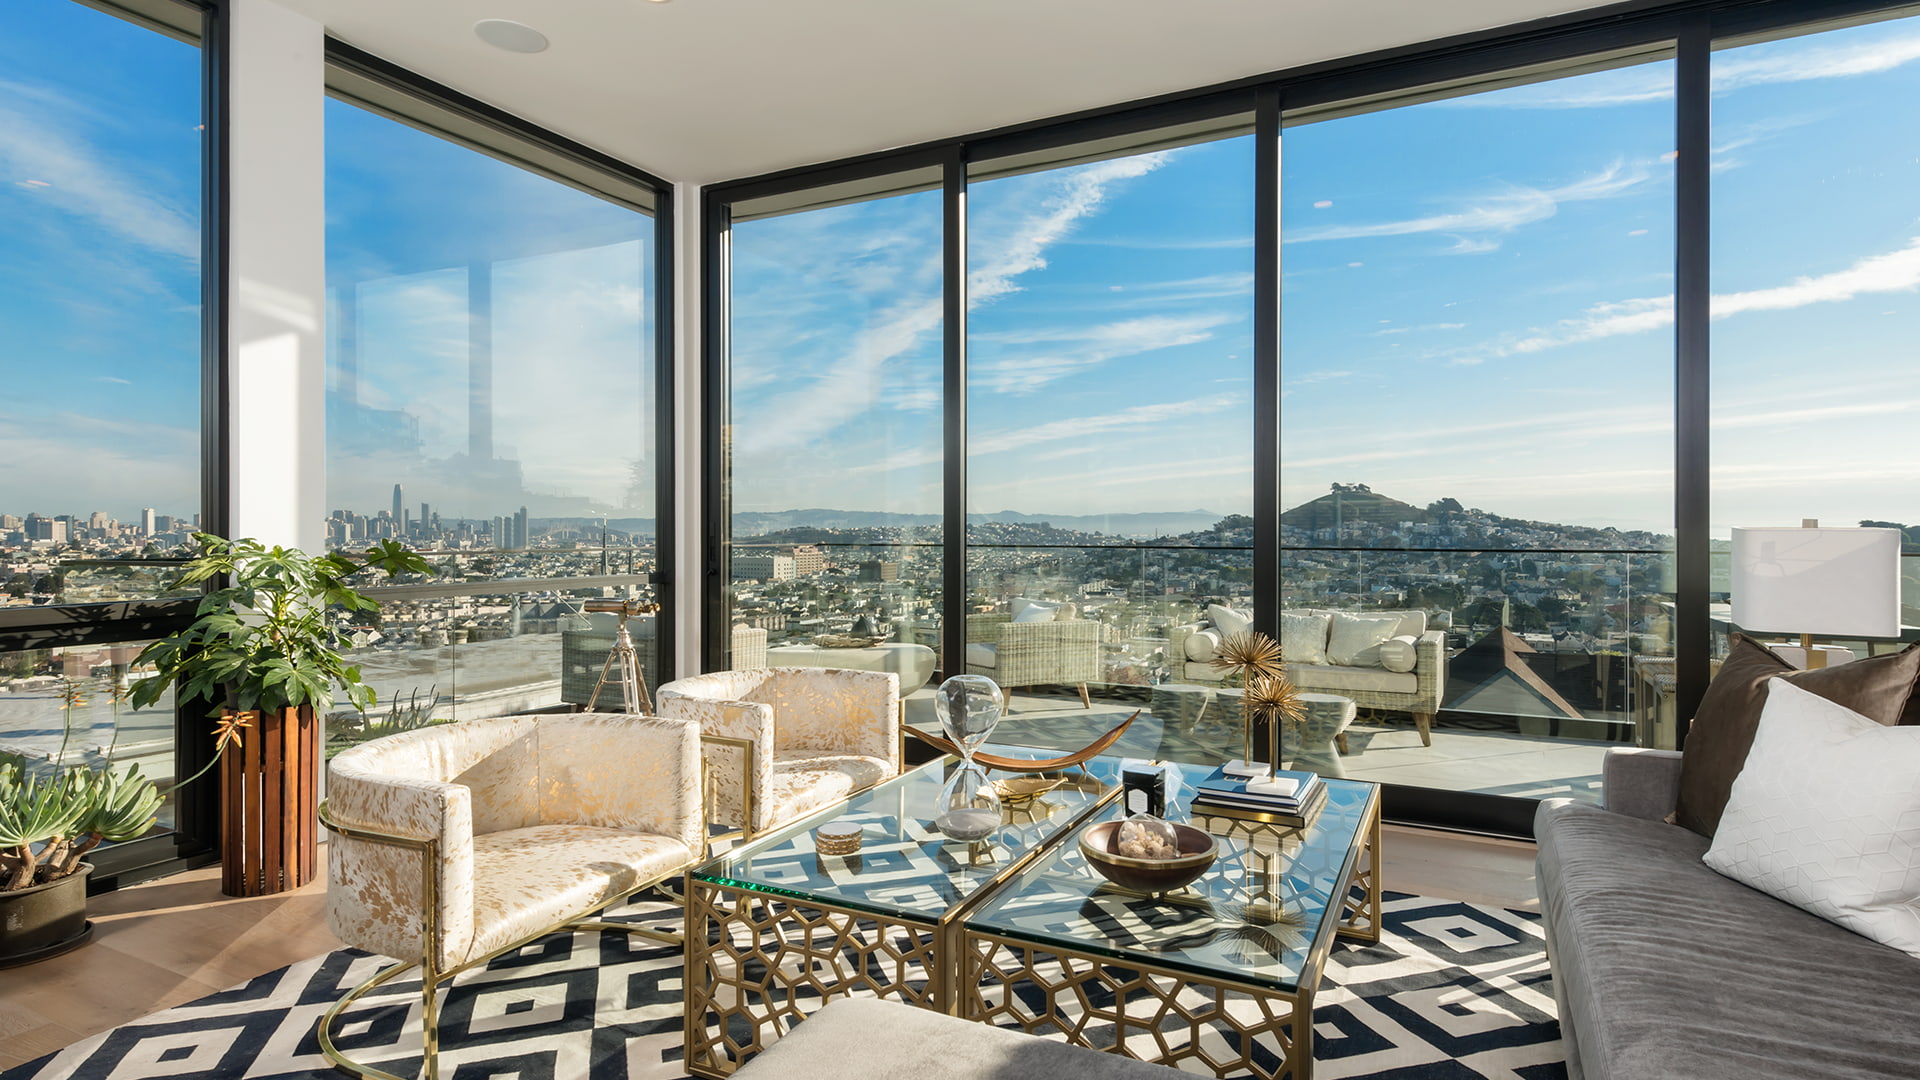 Penthouse view of the city skyline through full pocket doors